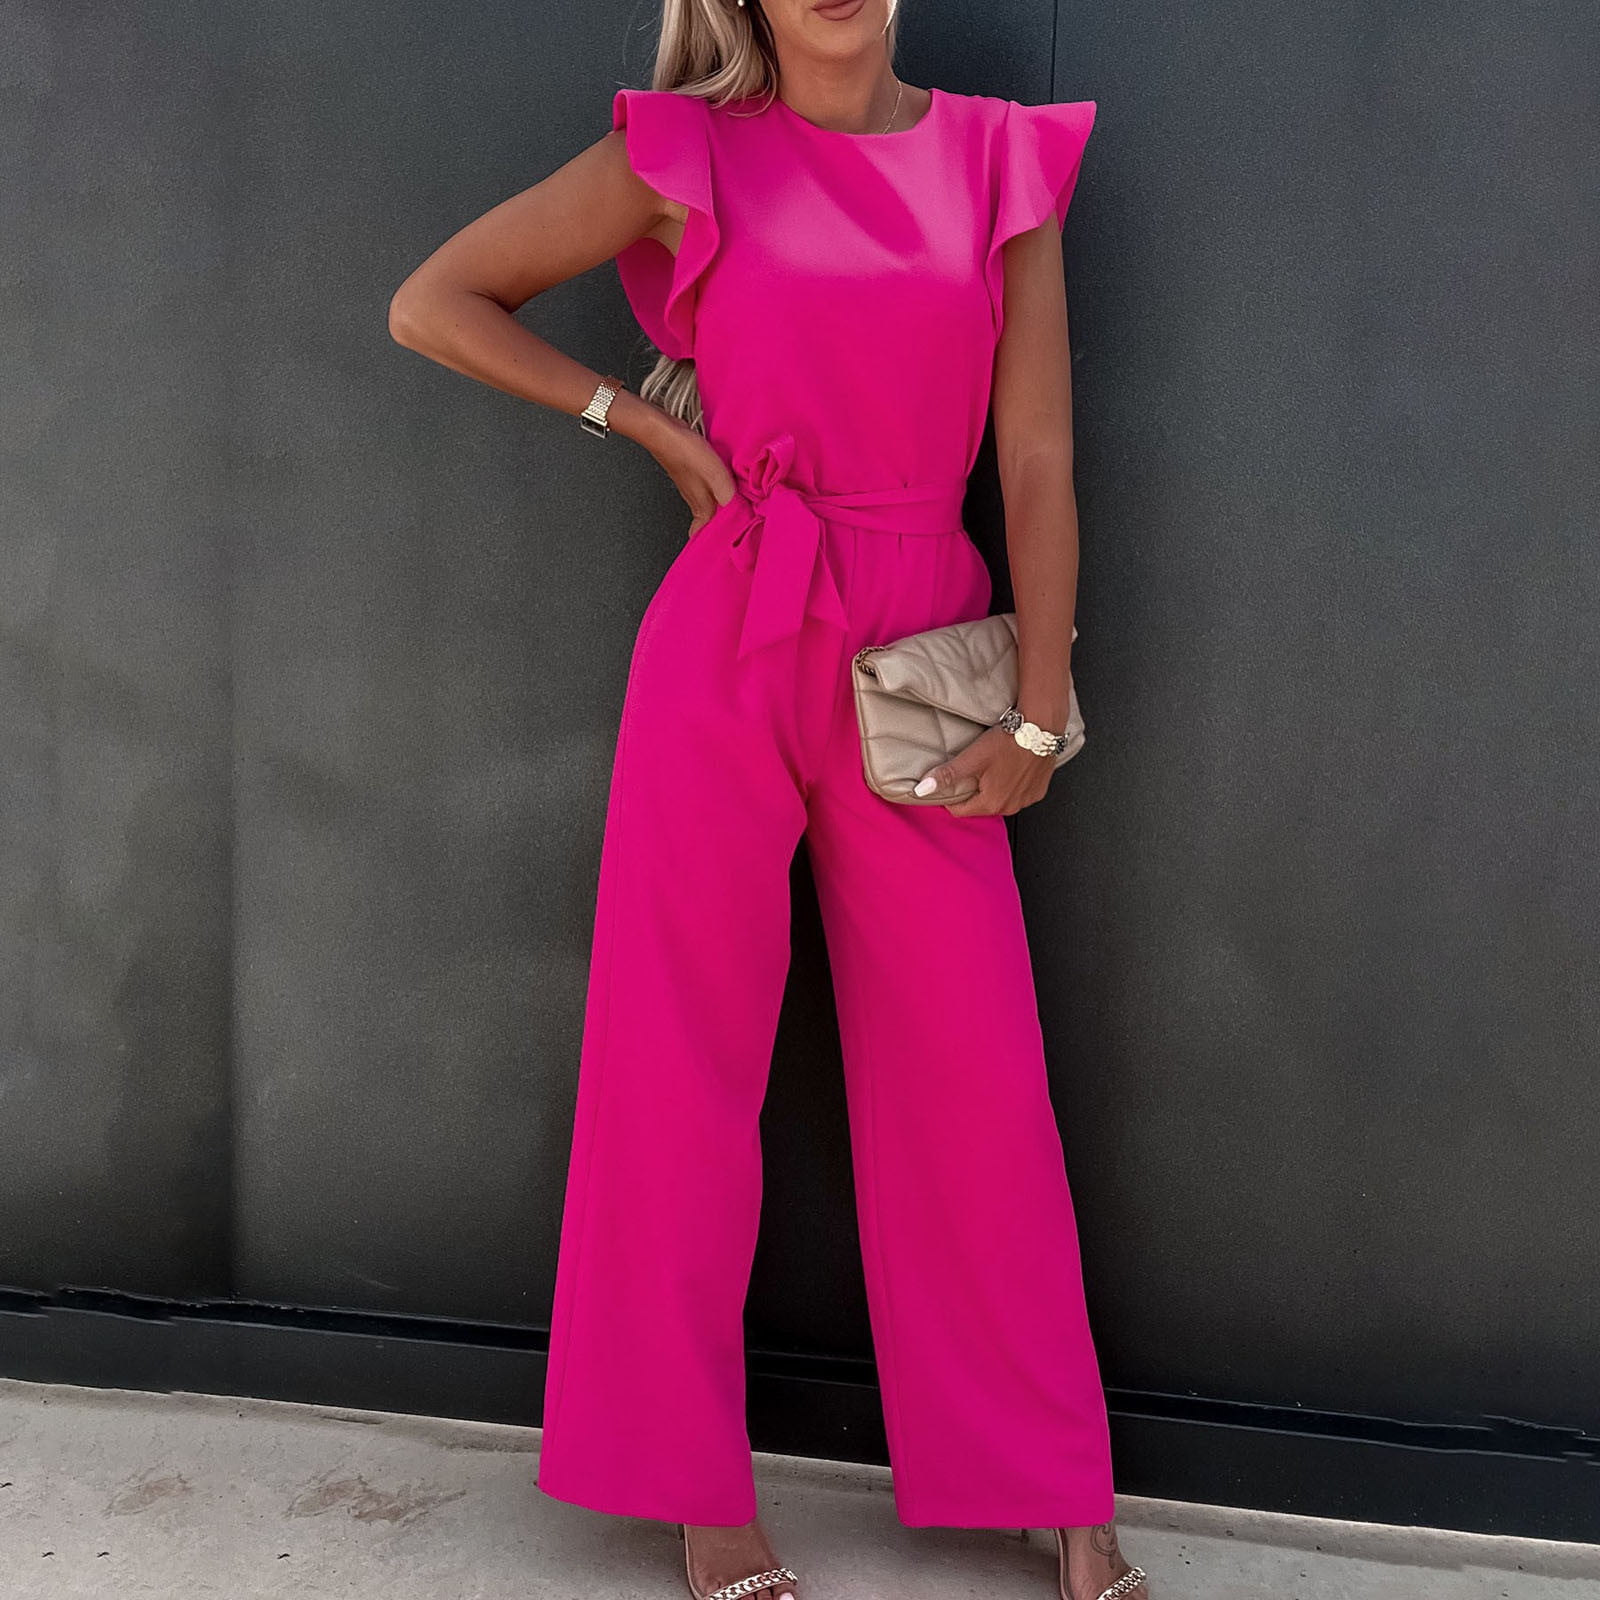 Xysaqa Romper Dress, Womens Elegant Ruffle Sleeve Jumpsuits High Waist  Belted Wide Leg Long Pants Rompers for Cocktail Party Formal Wedding